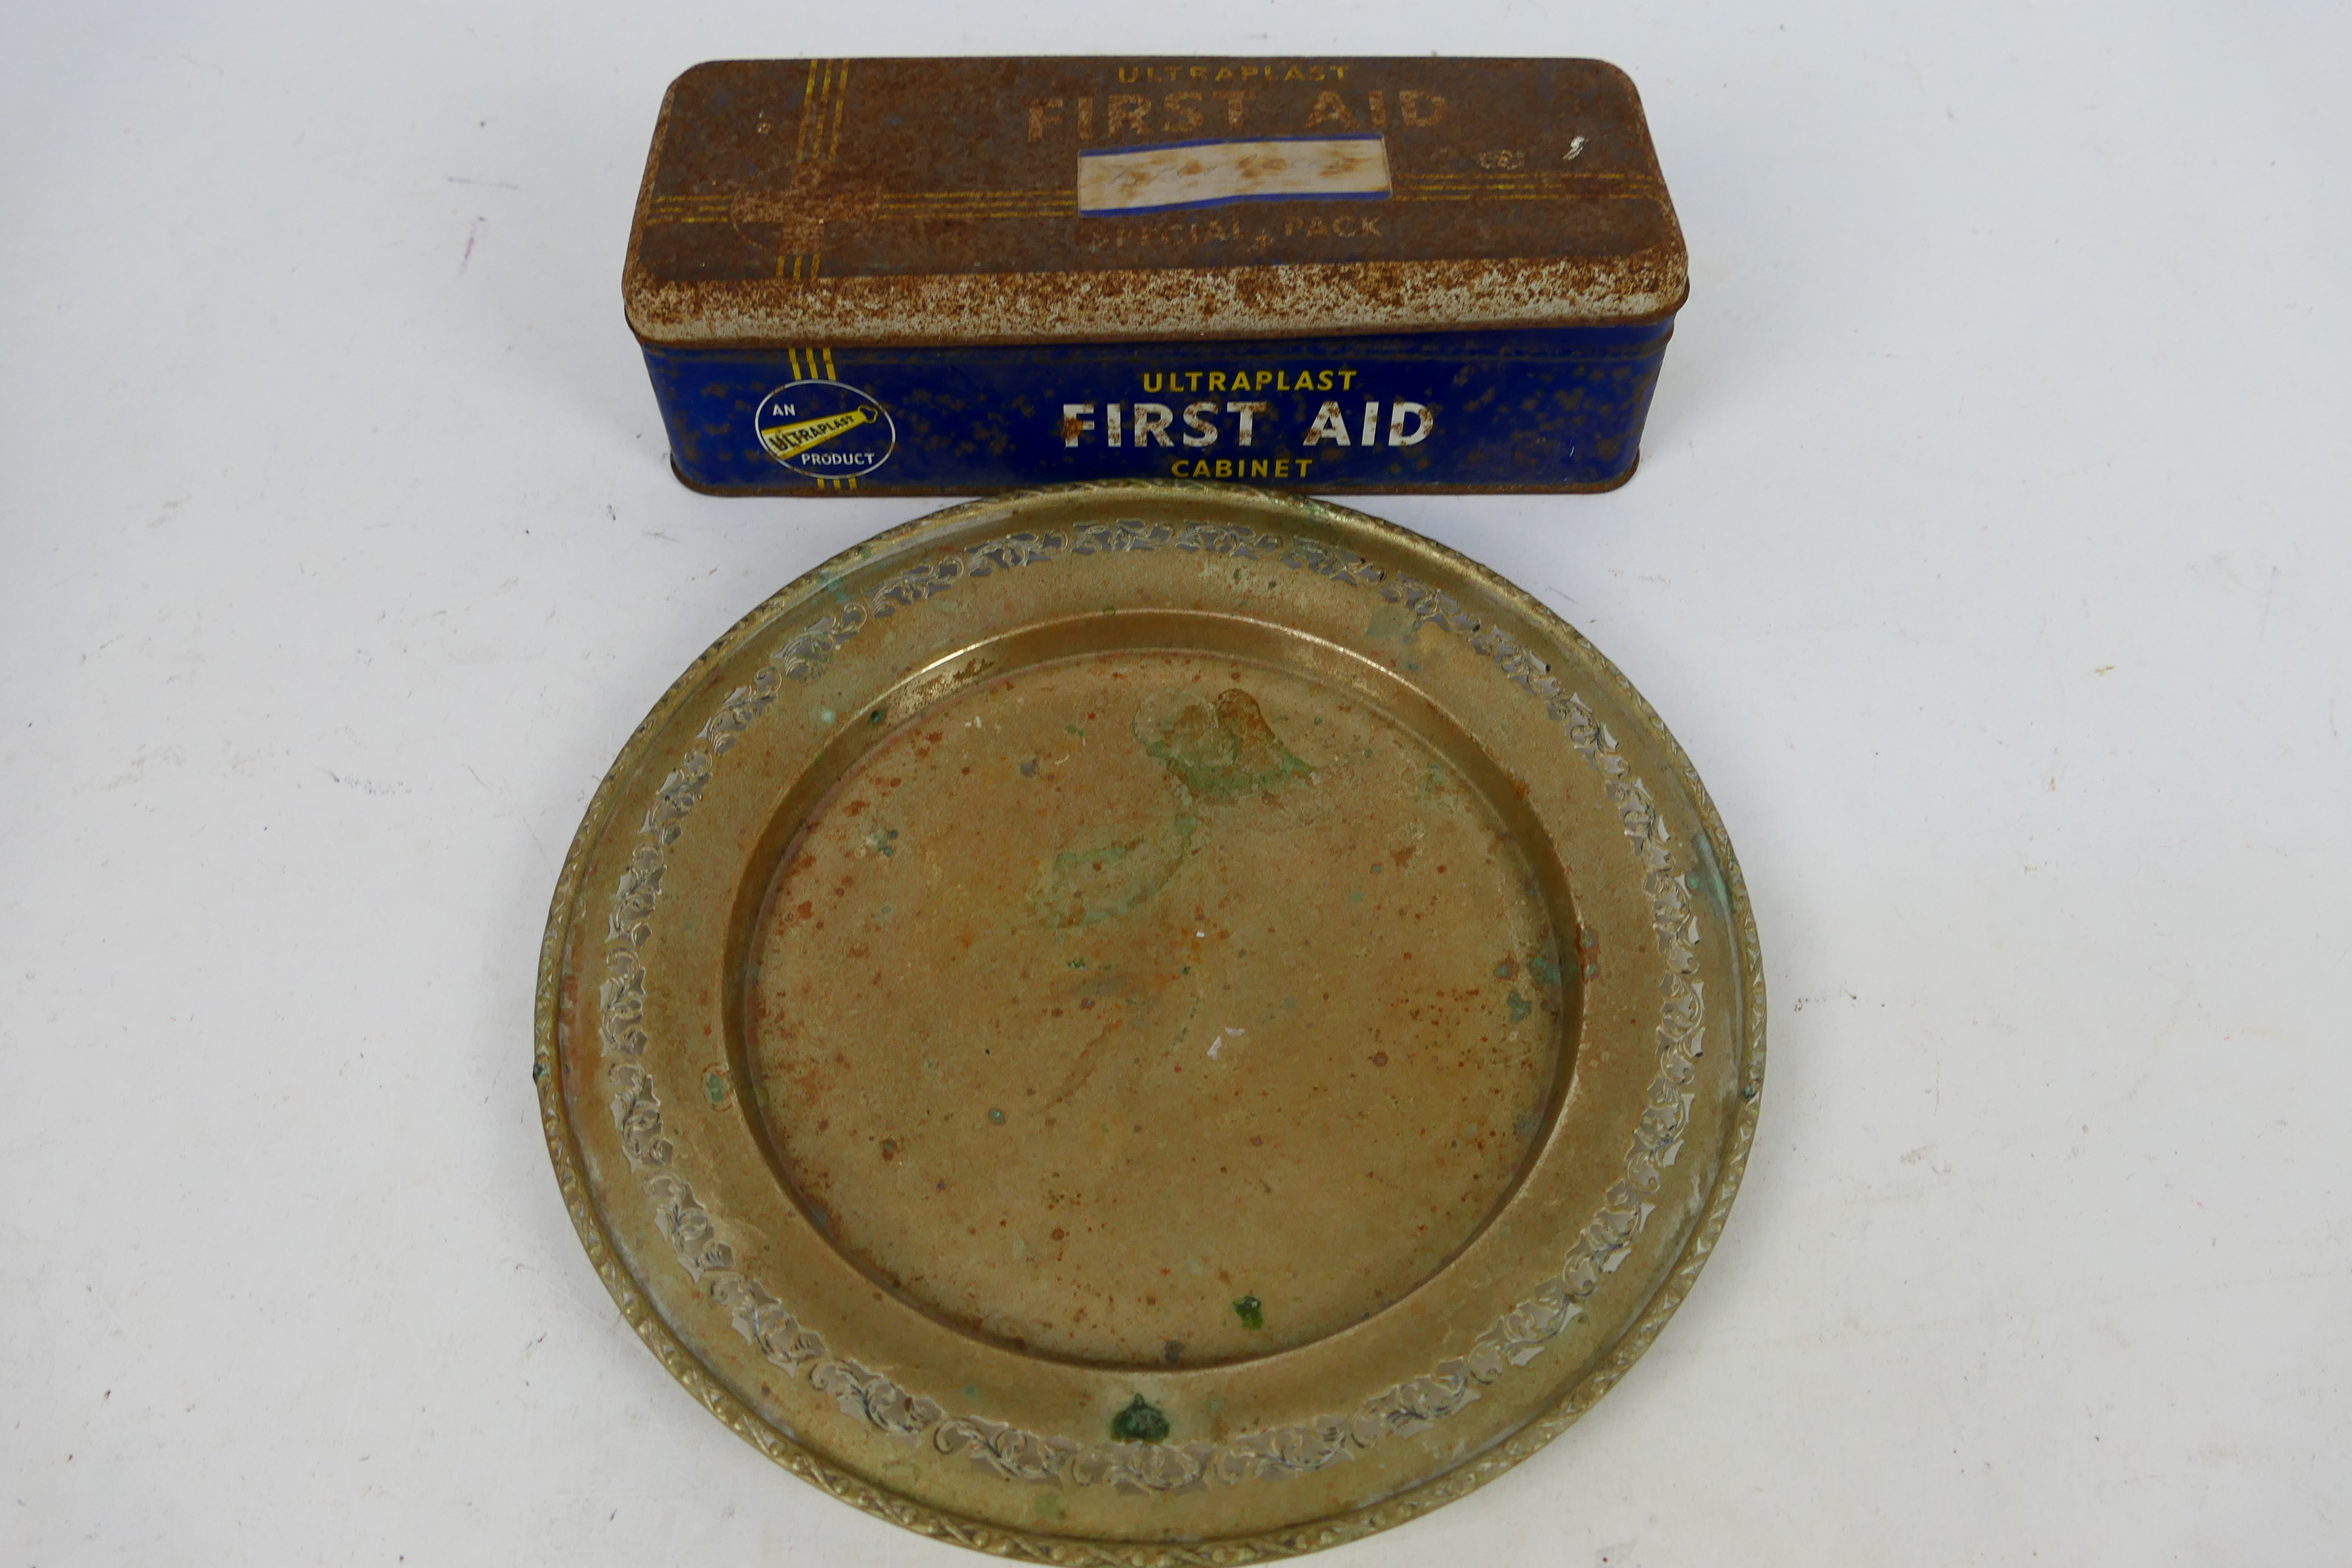 Plated Silver Plate - Ultraplast First Aid Tin.